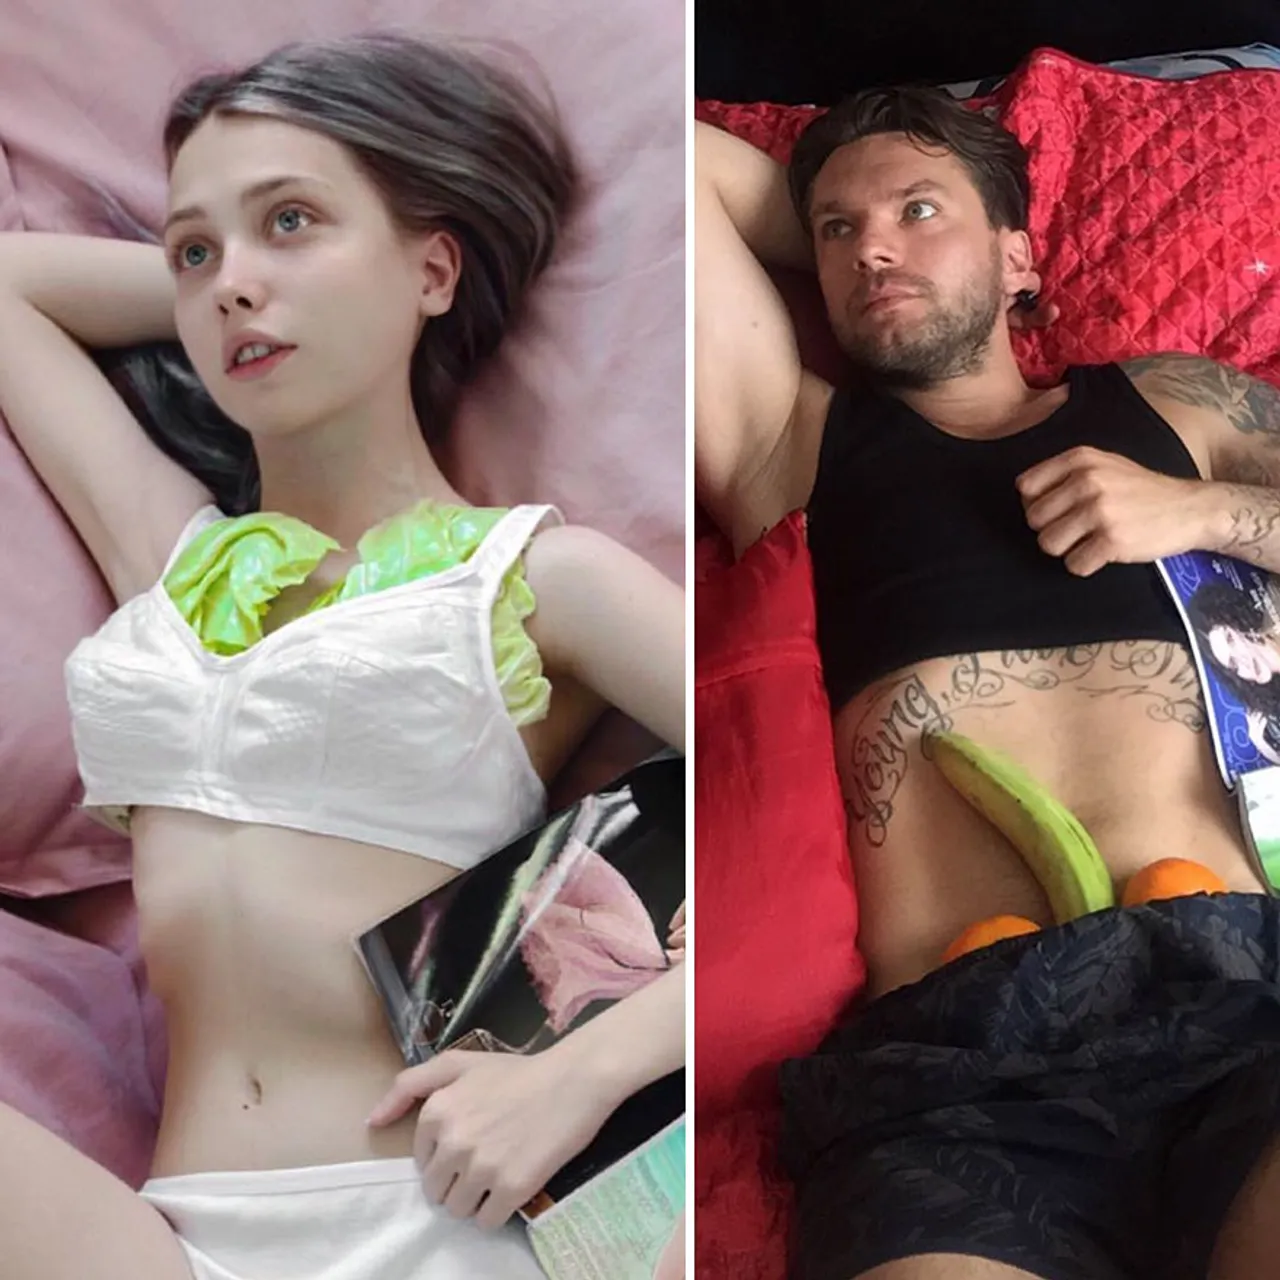 This-Russian-creates-low-budget-cosplays-and-his-nearly-55-mils-followers-on-instagram-go-crazy-59f98f2b39b97__880